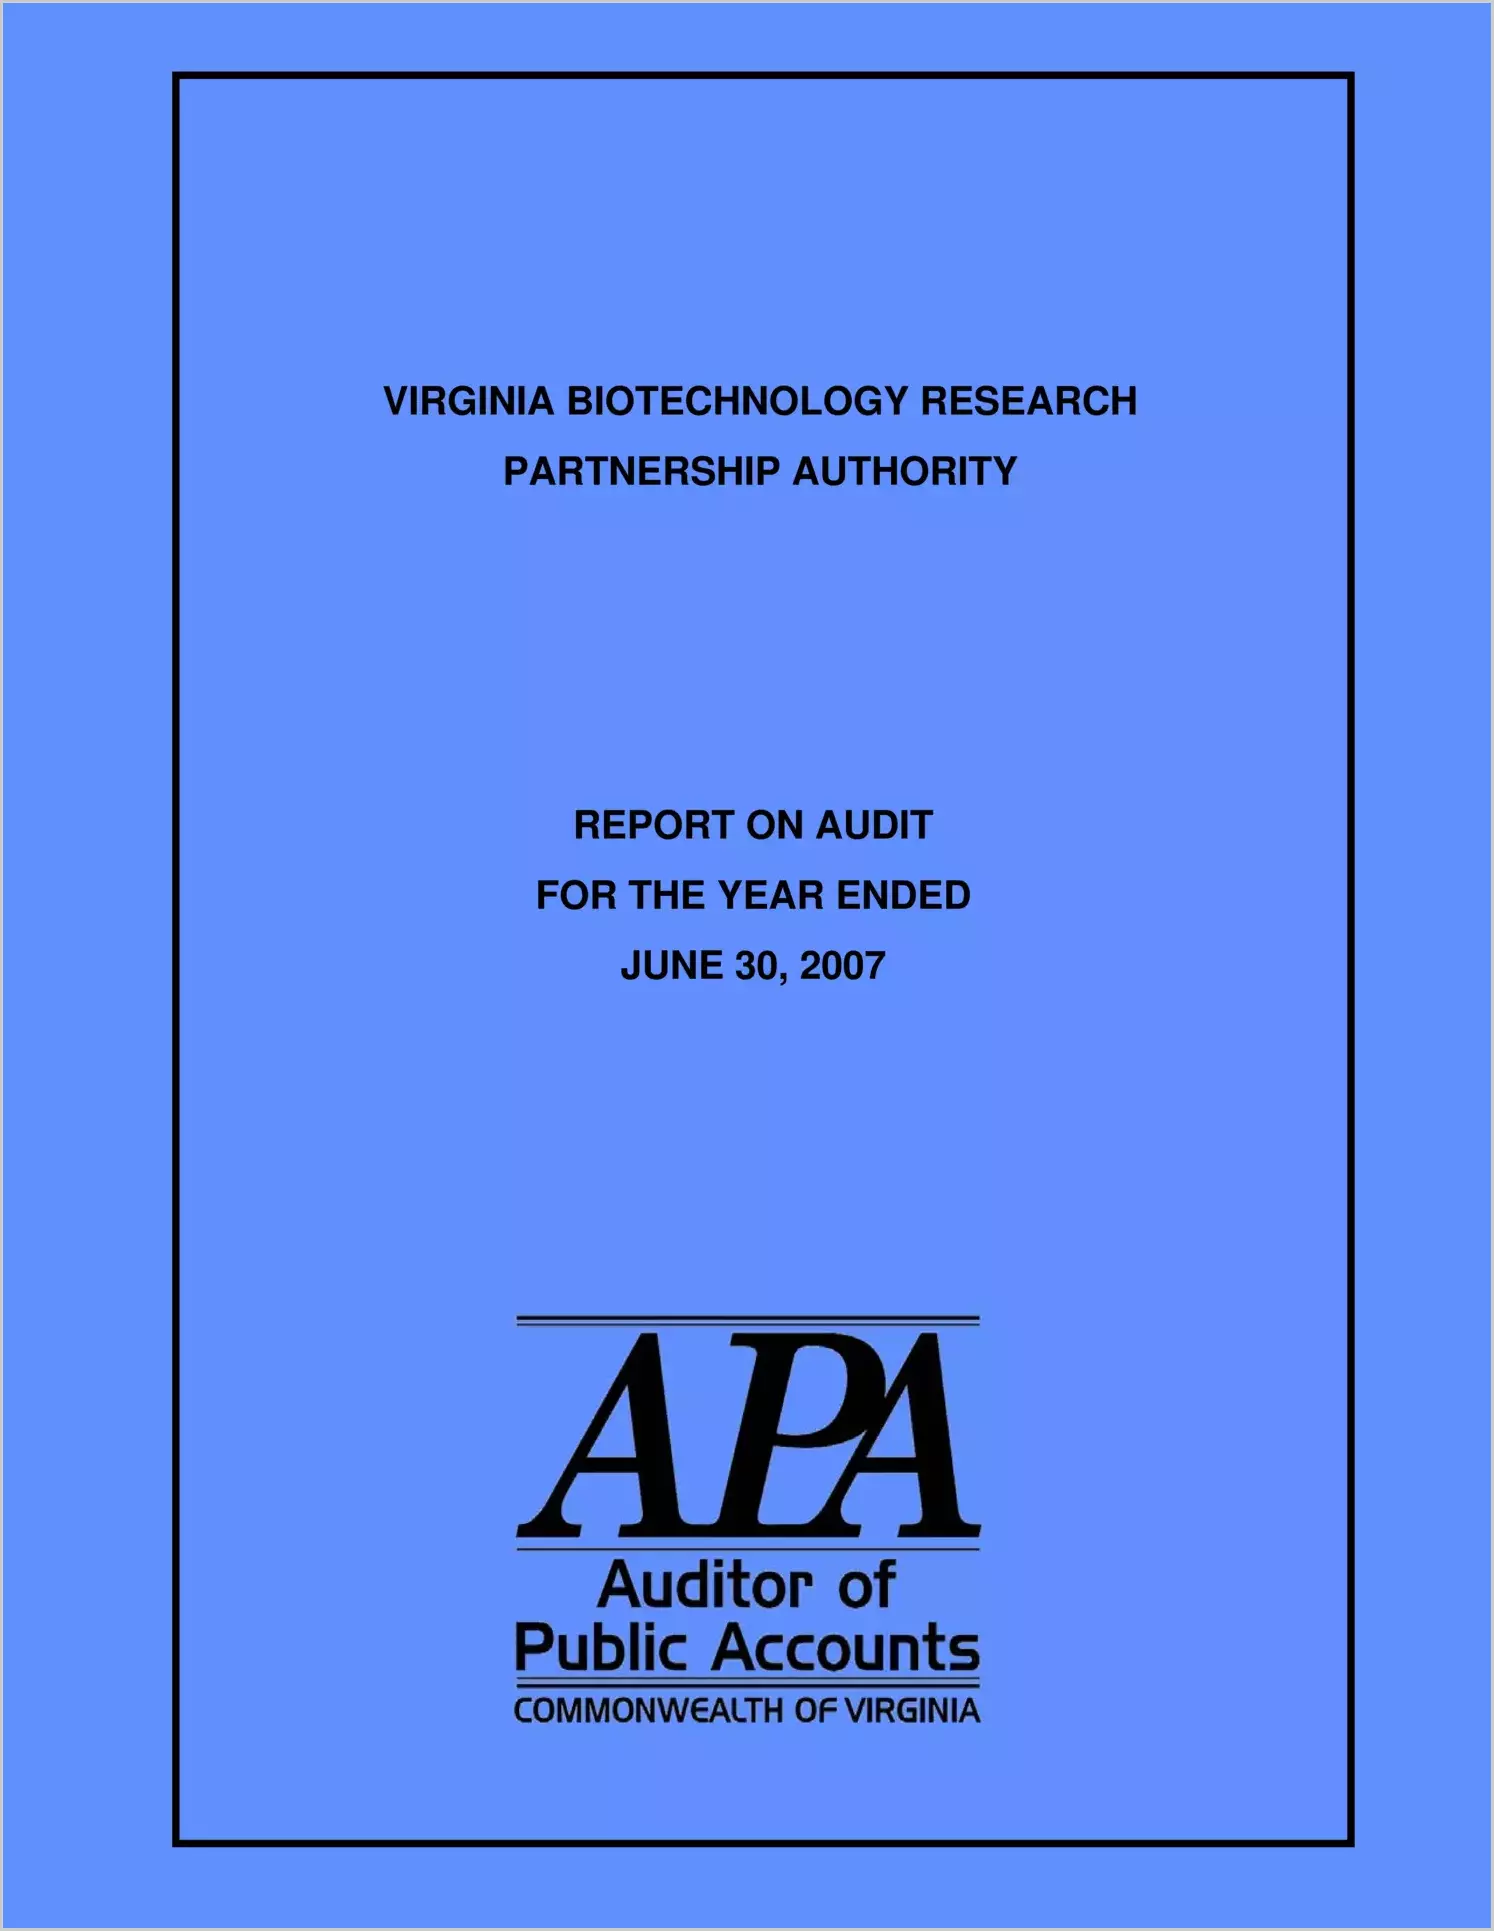 Virginia Biotechnology Research Parntership Authority for the year ended June 30, 2007